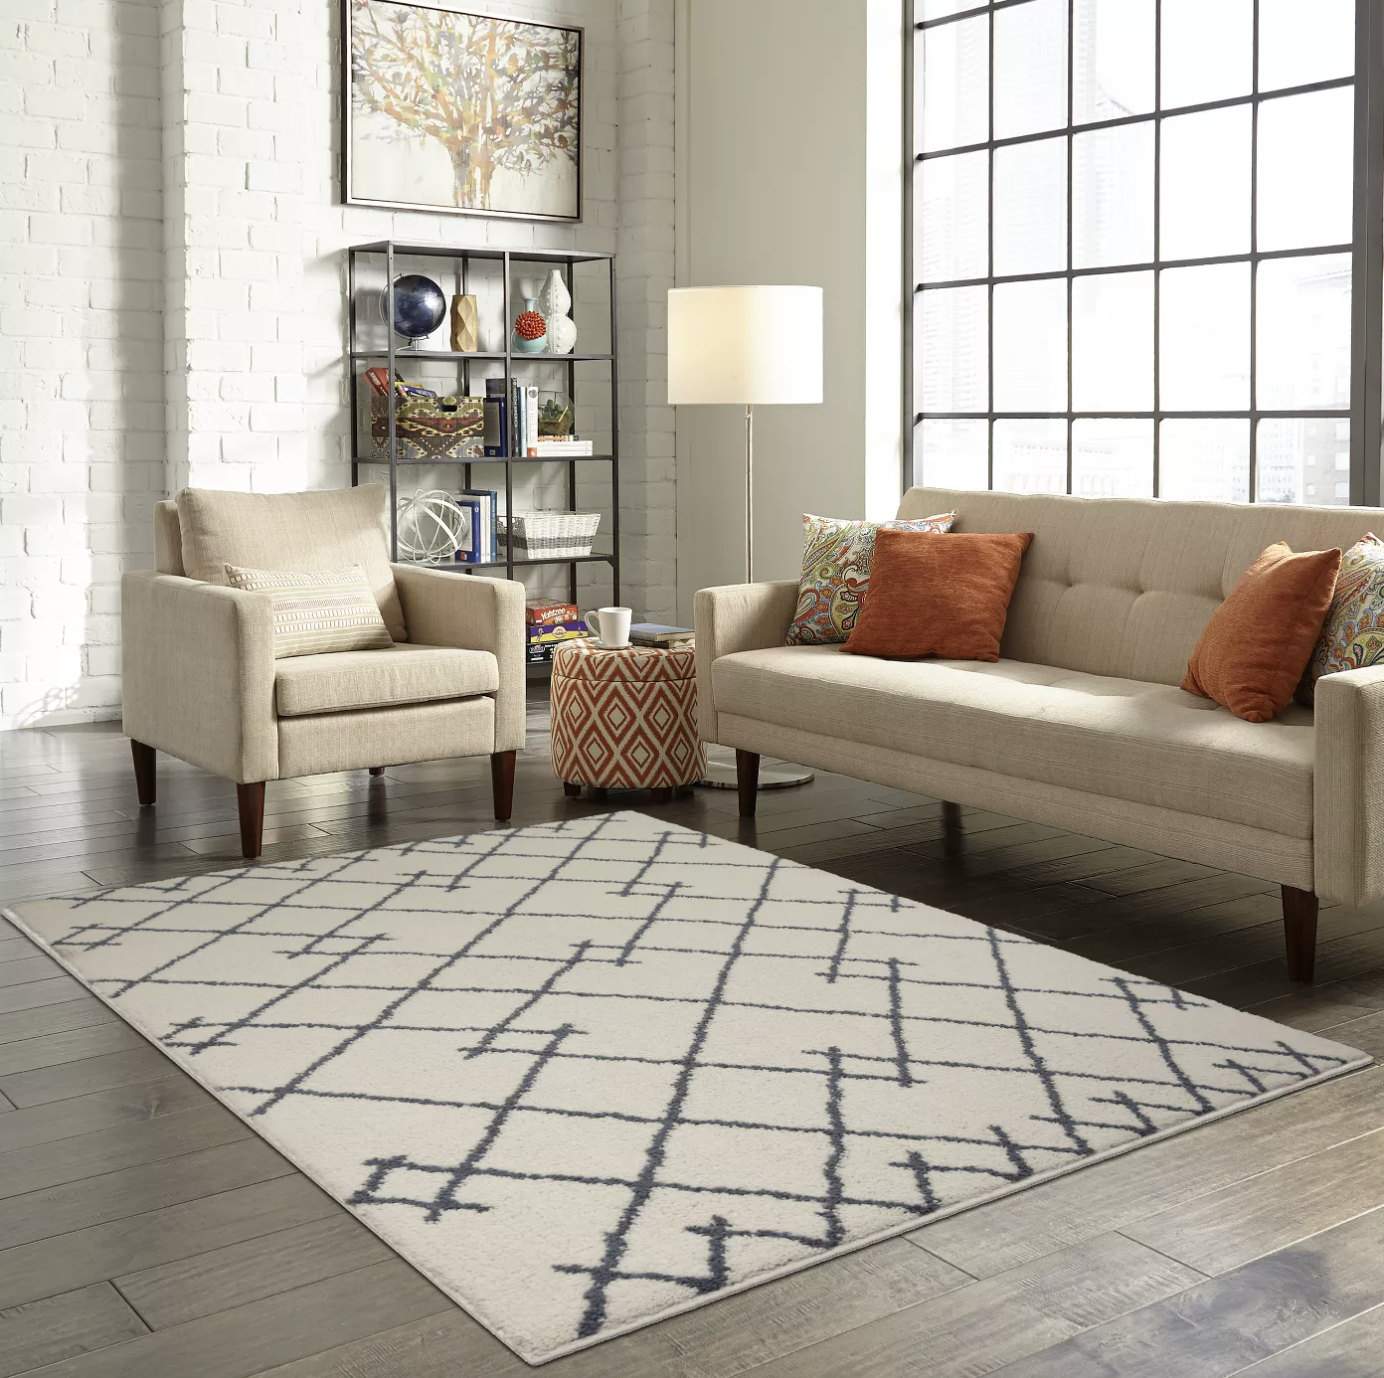 a white rug with a gray linear pattern on it